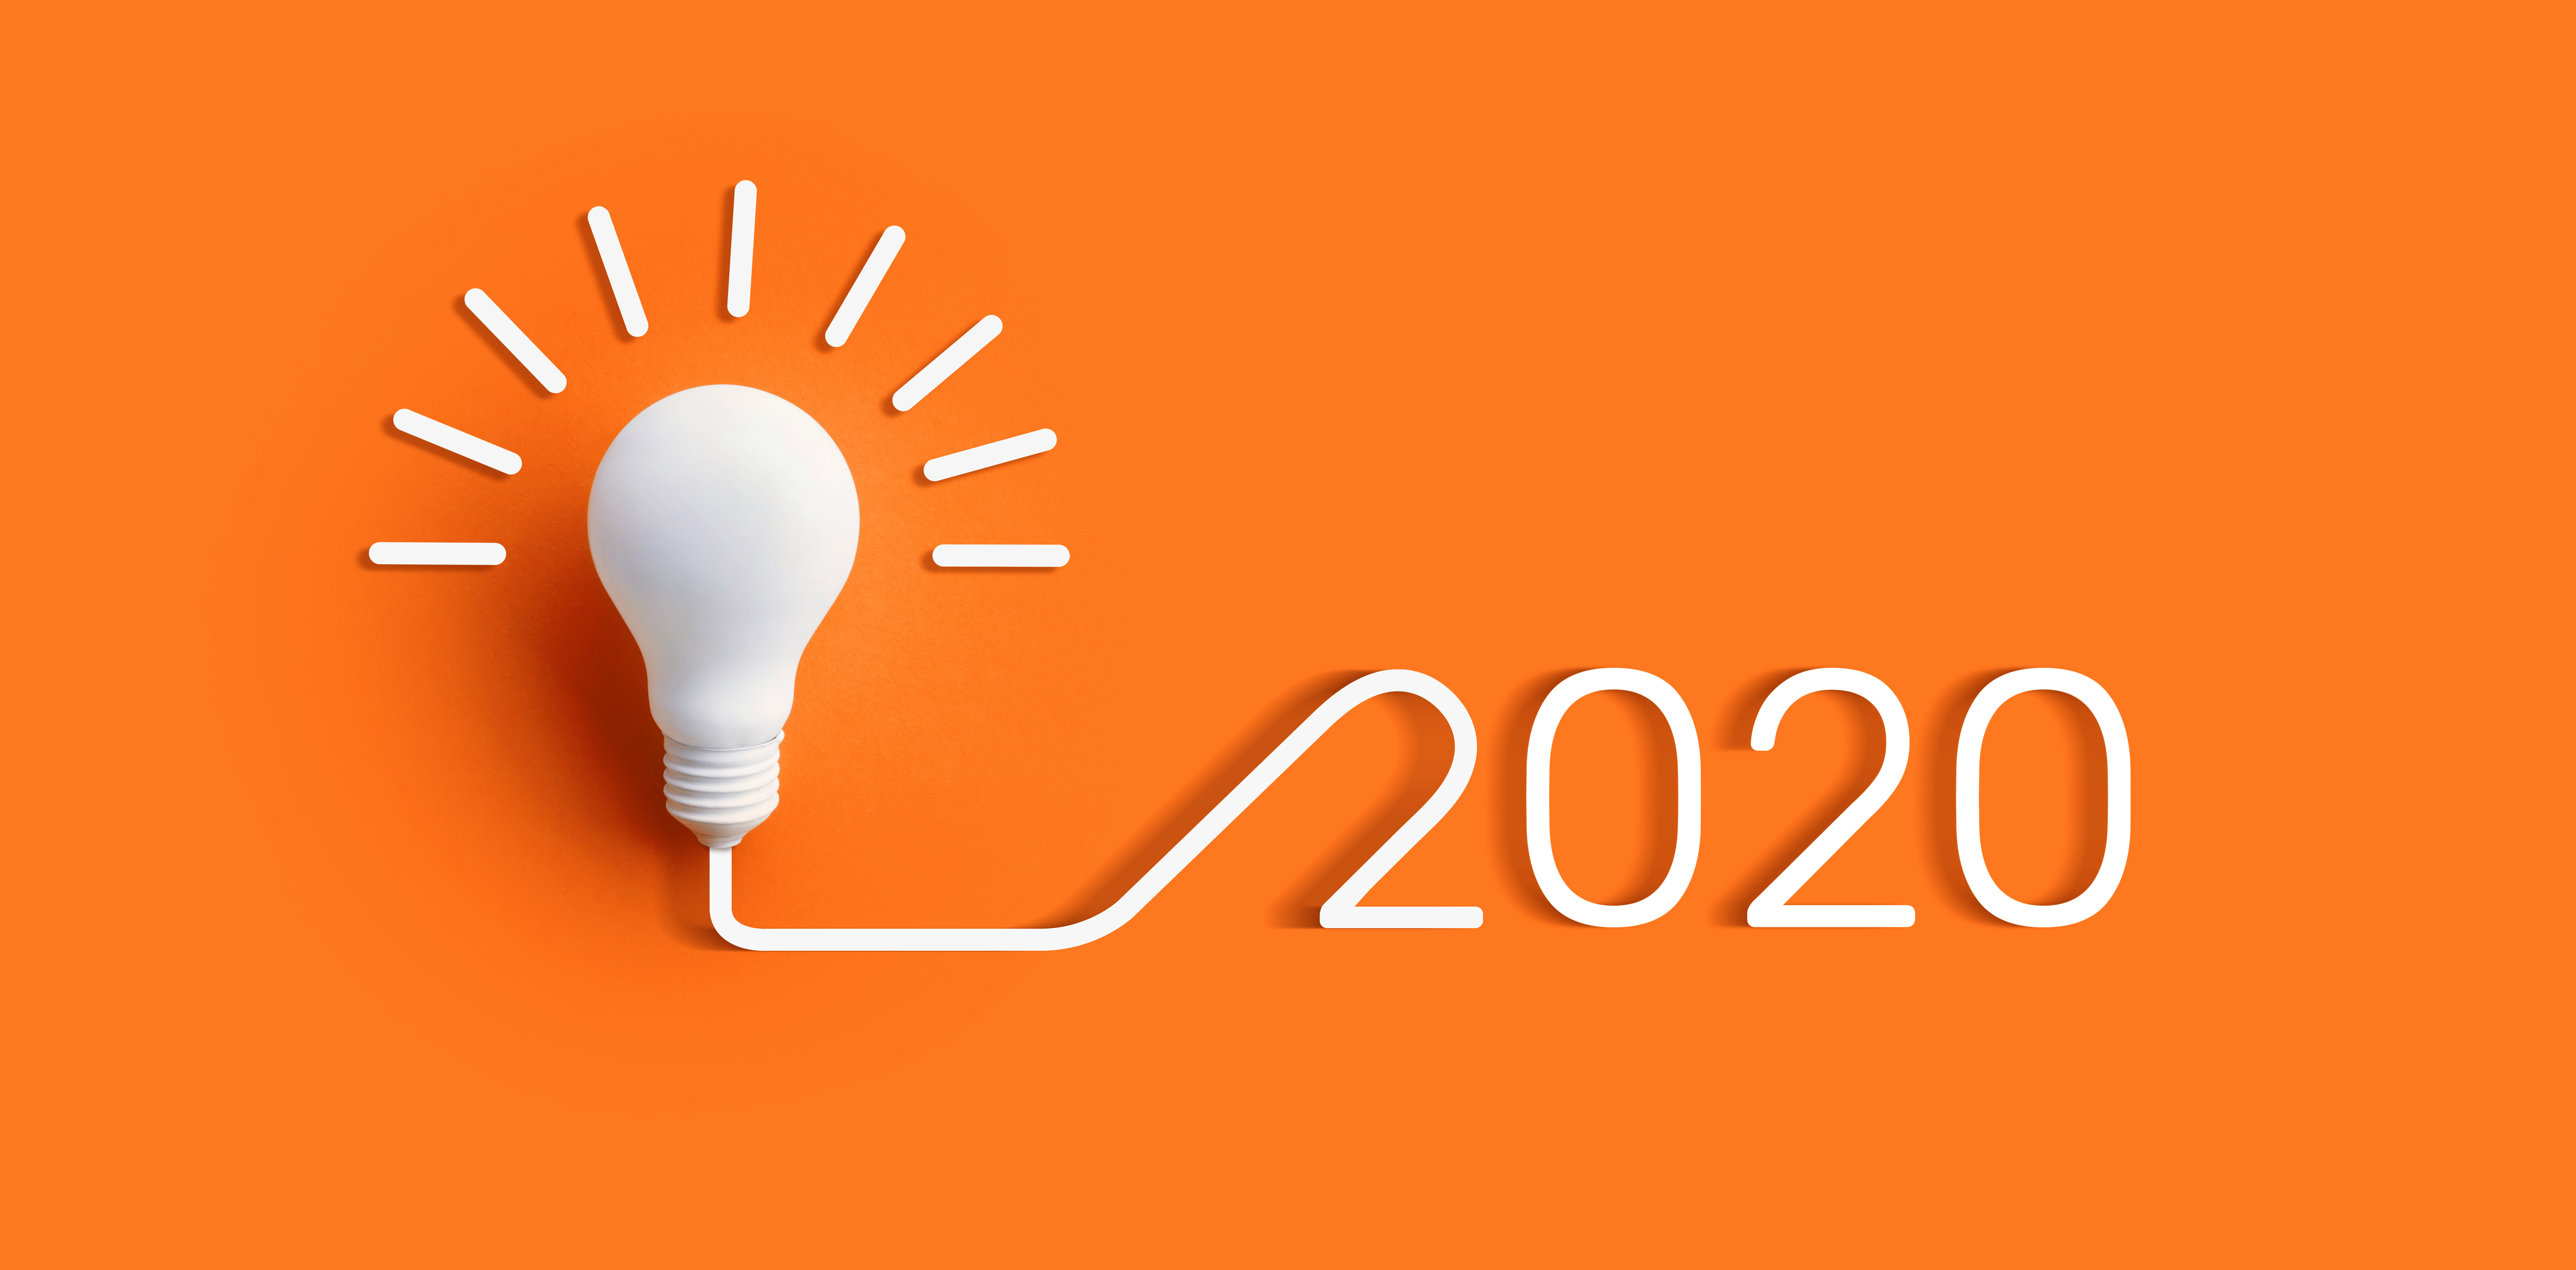 Orange background with the year 2020